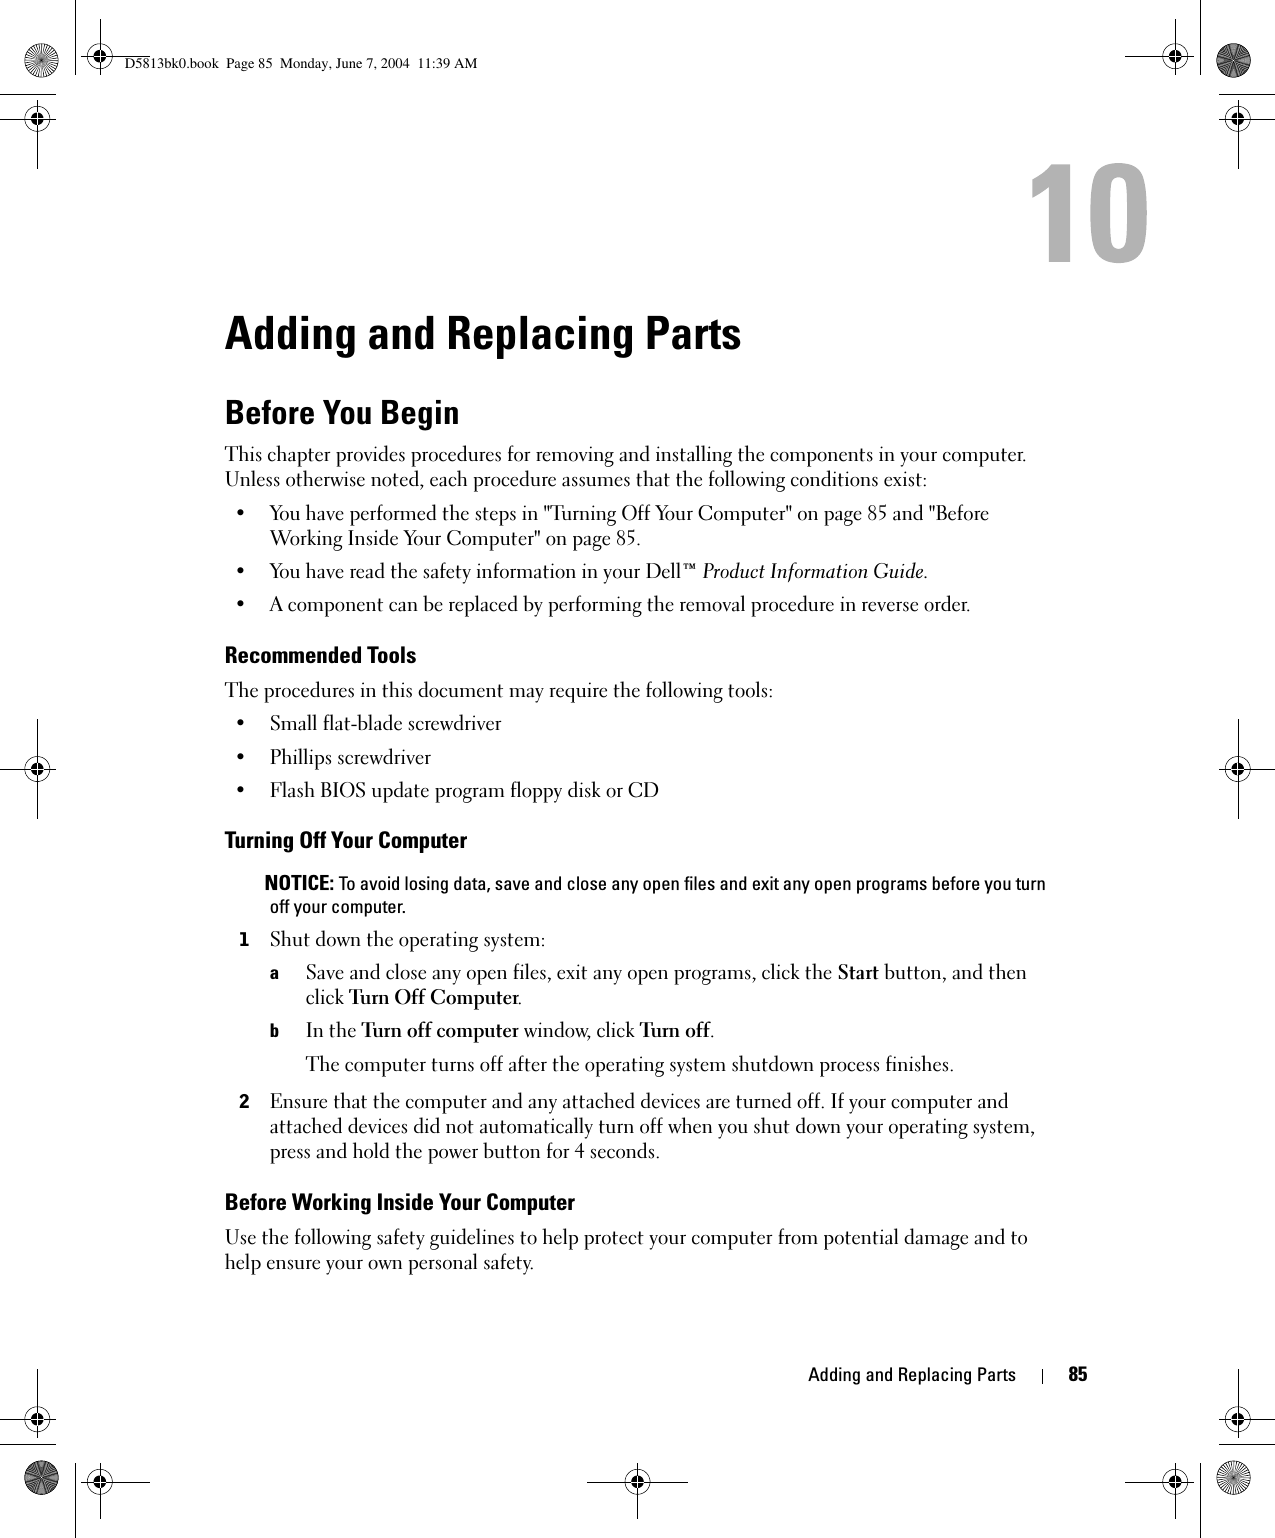 Adding and Replacing Parts 85Adding and Replacing PartsBefore You BeginThis chapter provides procedures for removing and installing the components in your computer. Unless otherwise noted, each procedure assumes that the following conditions exist:• You have performed the steps in &quot;Turning Off Your Computer&quot; on page 85 and &quot;Before Working Inside Your Computer&quot; on page 85.• You have read the safety information in your Dell™ Product Information Guide.• A component can be replaced by performing the removal procedure in reverse order.Recommended ToolsThe procedures in this document may require the following tools:• Small flat-blade screwdriver• Phillips screwdriver• Flash BIOS update program floppy disk or CDTurning Off Your Computer NOTICE: To avoid losing data, save and close any open files and exit any open programs before you turn off your computer.1Shut down the operating system:aSave and close any open files, exit any open programs, click the Start button, and then click Turn Off Computer.bIn the Turn off computer window, click Turn off. The computer turns off after the operating system shutdown process finishes.2Ensure that the computer and any attached devices are turned off. If your computer and attached devices did not automatically turn off when you shut down your operating system, press and hold the power button for 4 seconds.Before Working Inside Your ComputerUse the following safety guidelines to help protect your computer from potential damage and to help ensure your own personal safety.D5813bk0.book  Page 85  Monday, June 7, 2004  11:39 AM